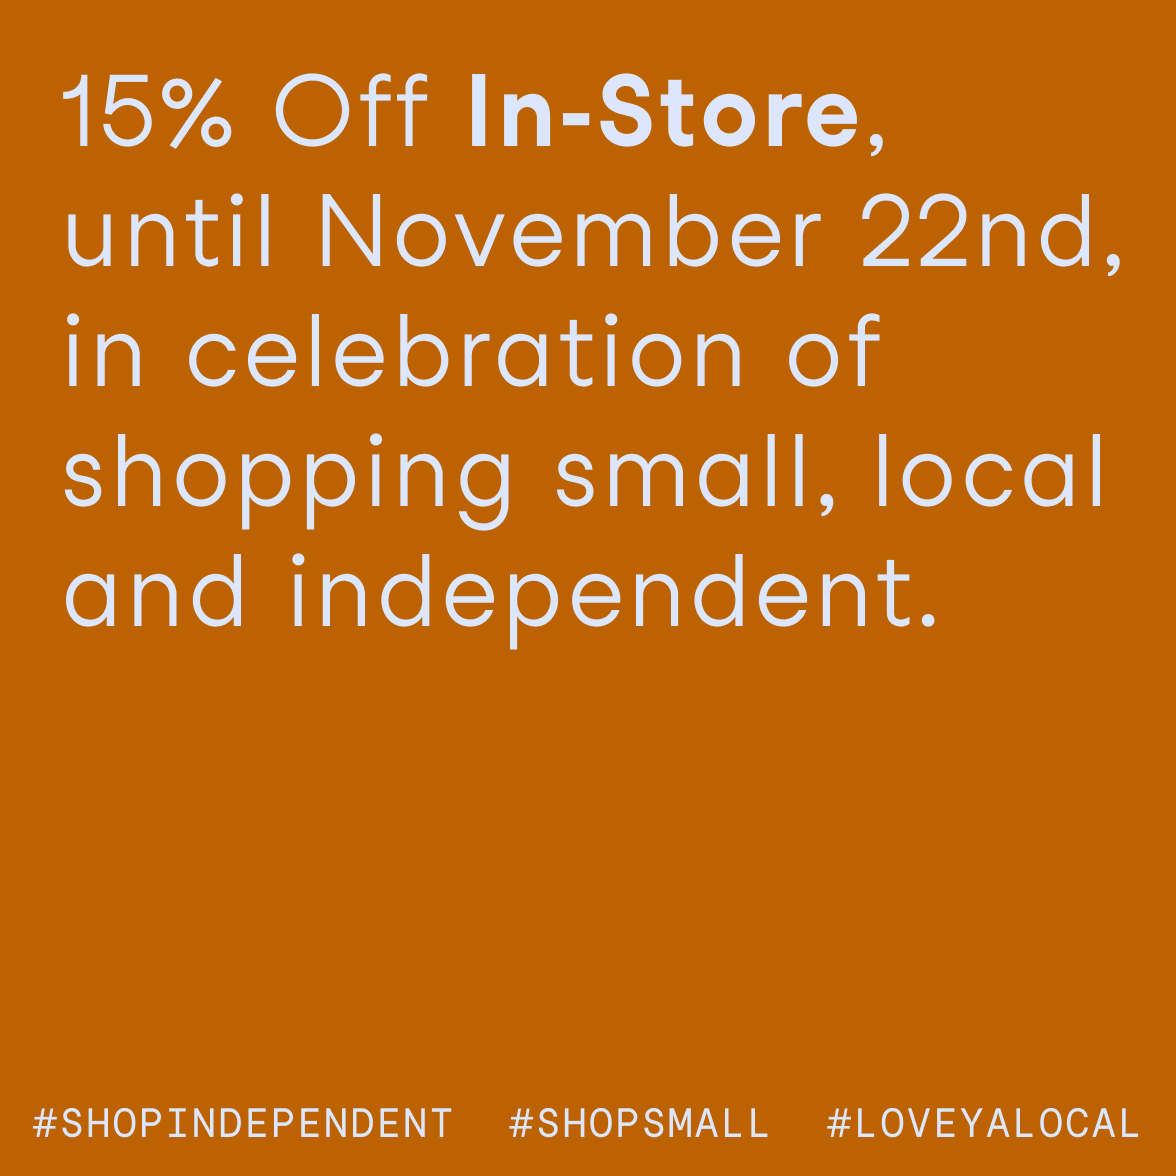 Don’t forget we’re offering 15% off in store only for the next week! Shop Small, Shop Local, Shop Independent, support the small guys - we’re here for you!! 😊 #roosbeach #shopsmall #shoplocal #smallbusiness #supportsmallbusiness #shopsmallbusiness #supportlocal #smallbusinessown